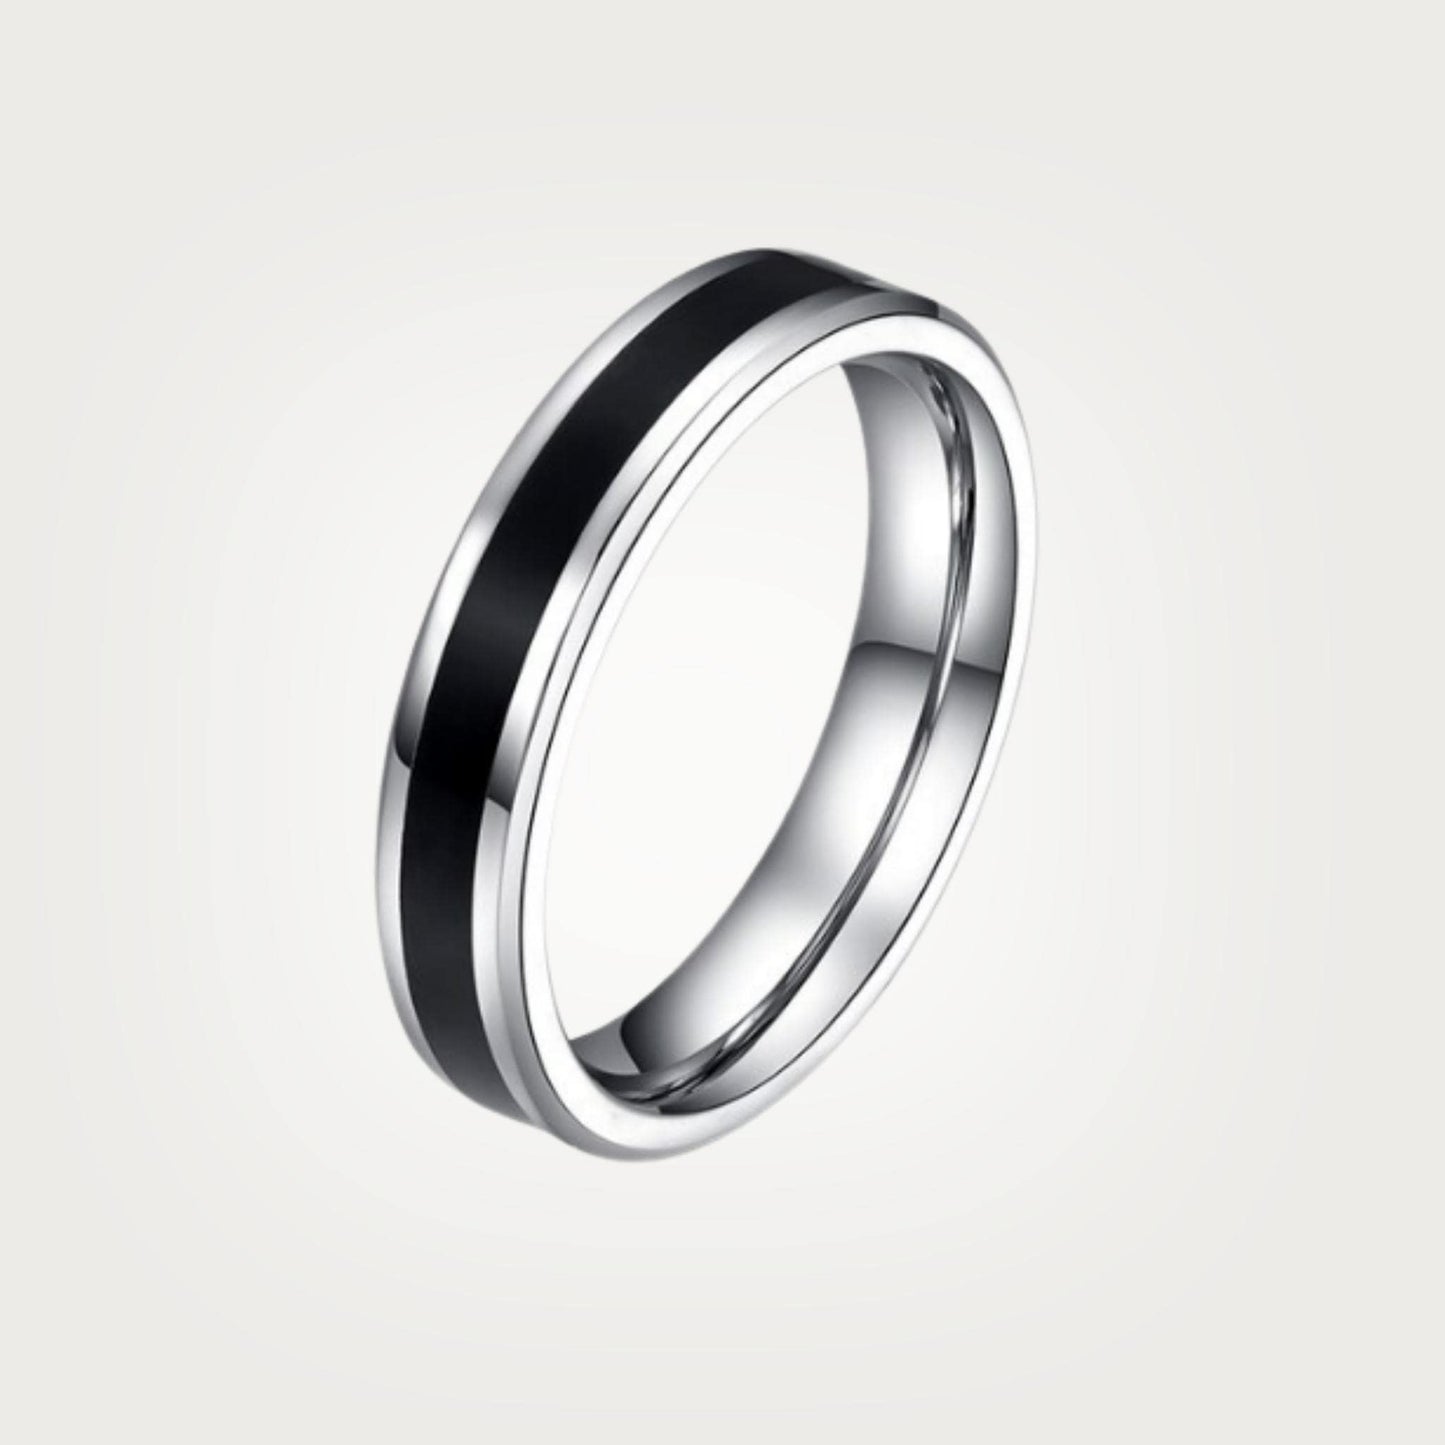 Black and Silver 4mm Classic Ring For Women or Men - Ring - Boutique Wear RENN